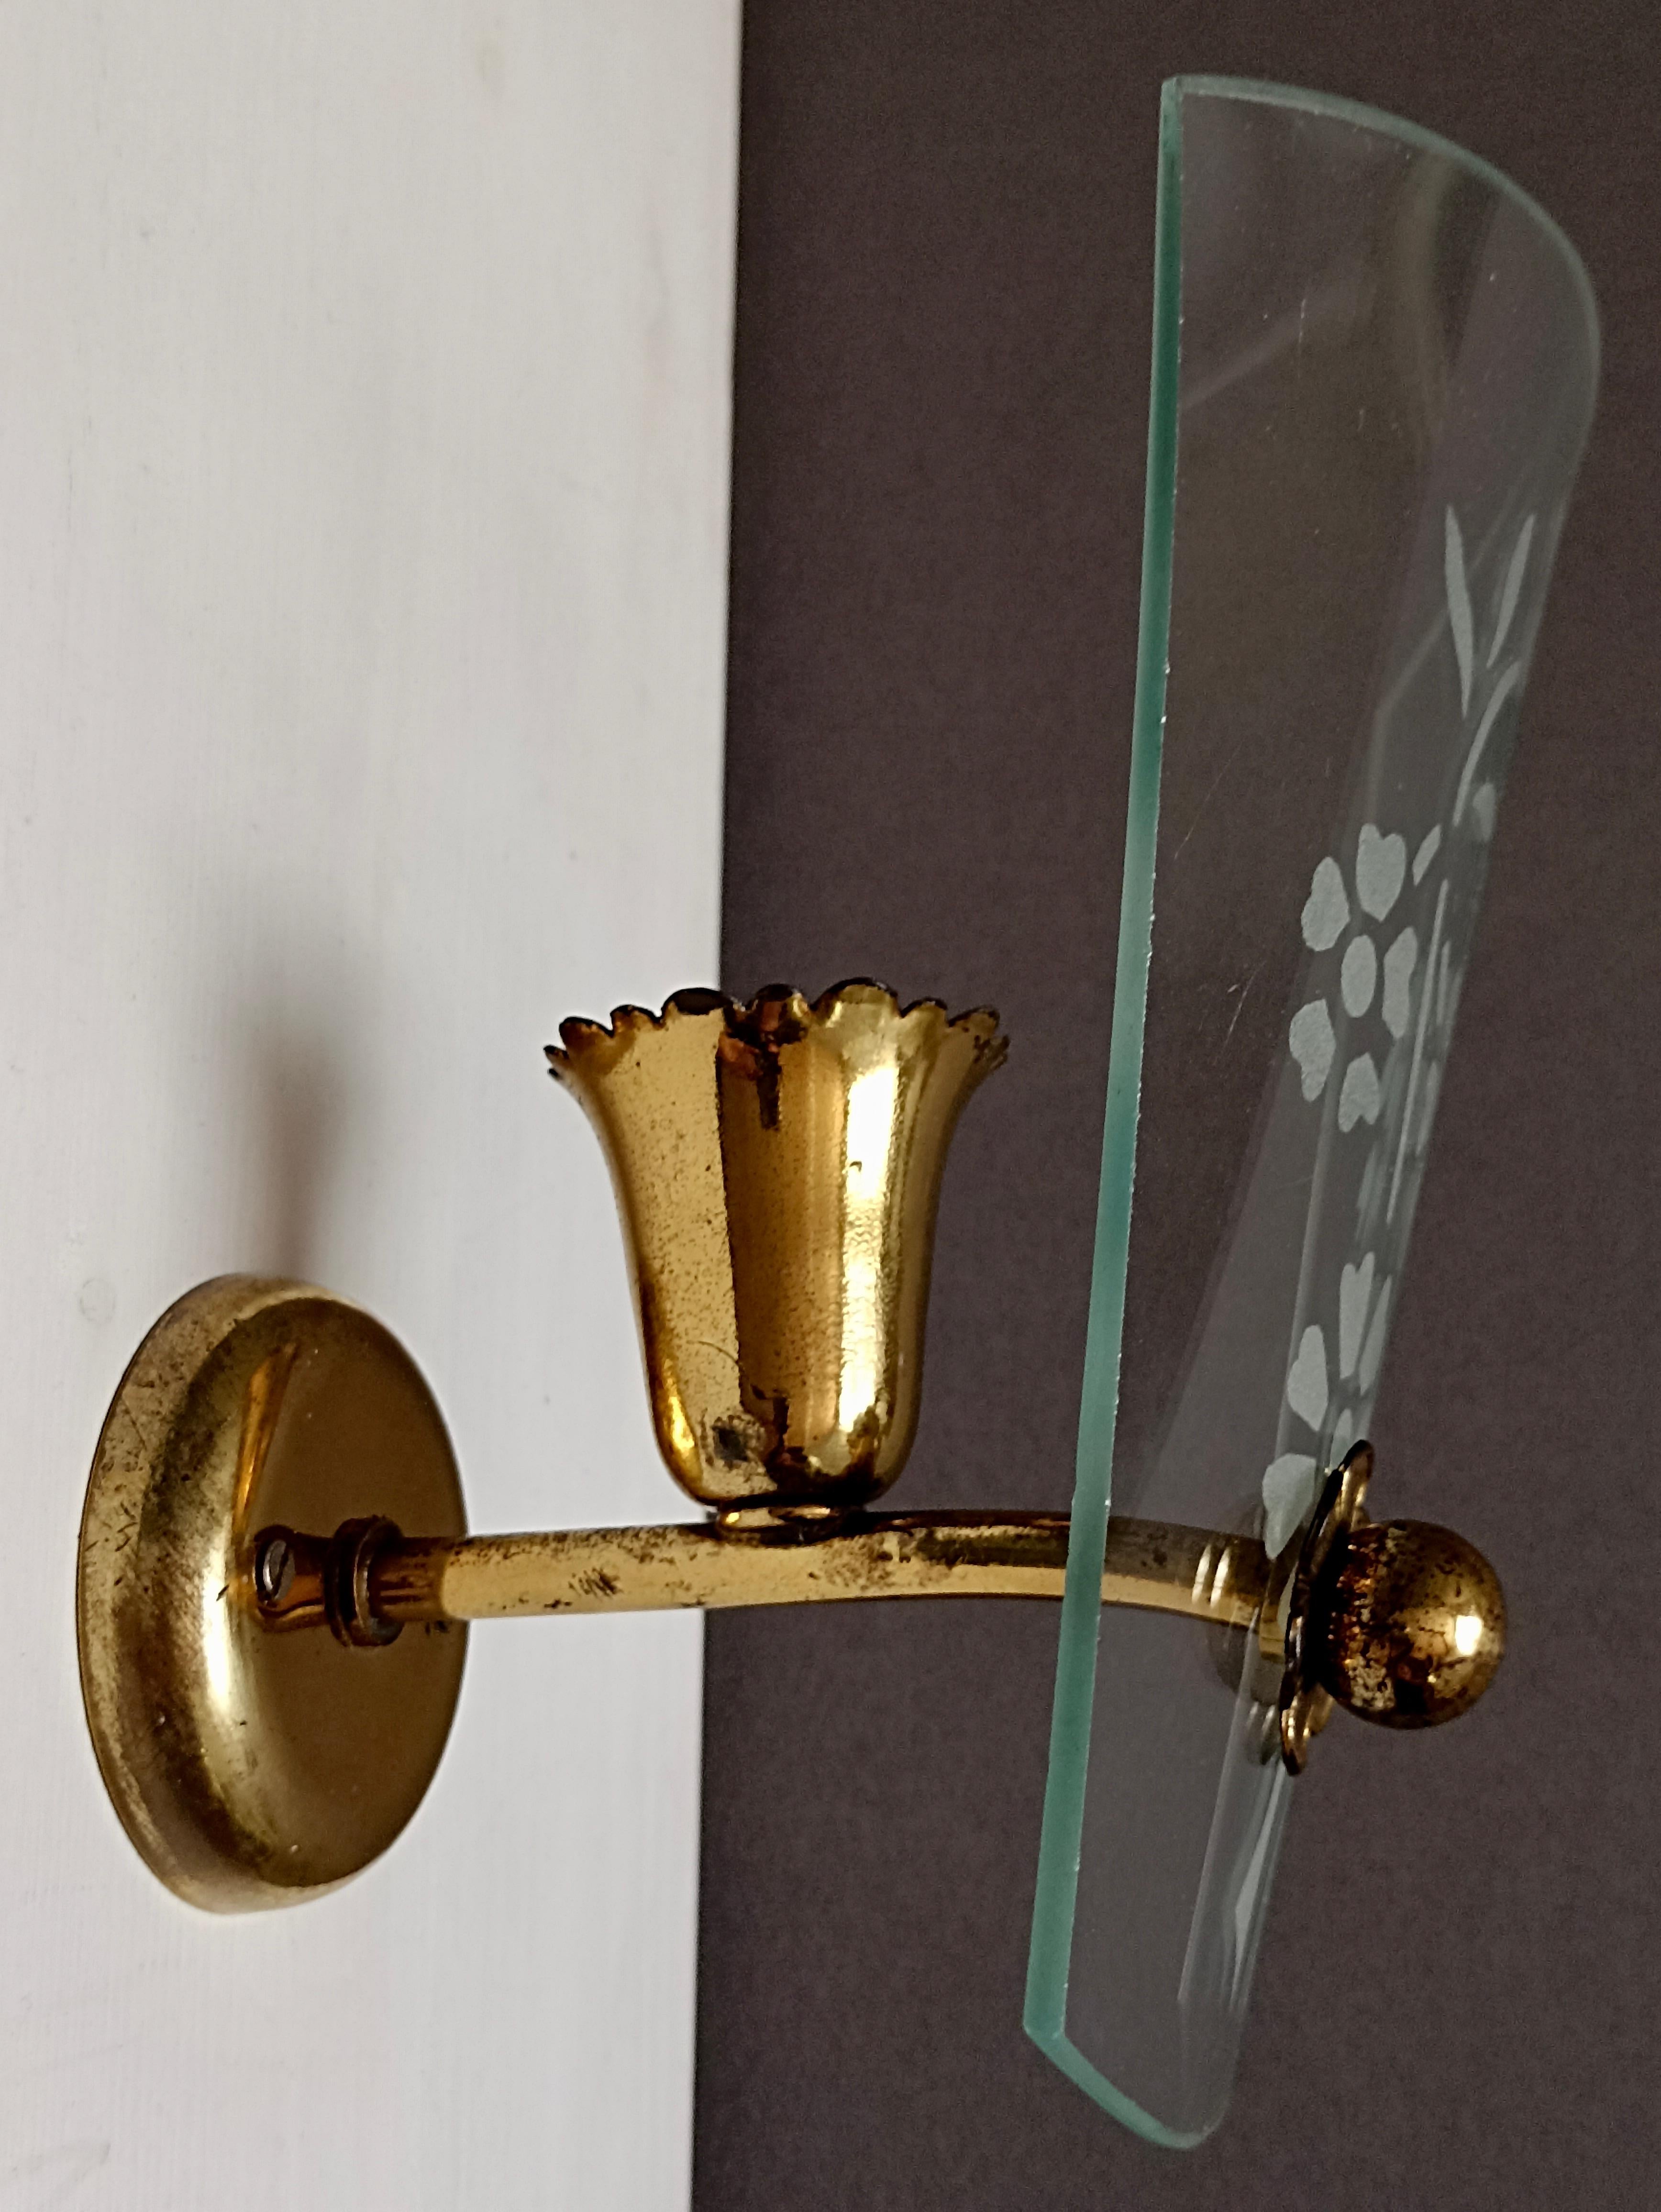 Beveled 1950s Italian Pietro Chiesa style wall lamp, solid brass and glass lampshade. For Sale